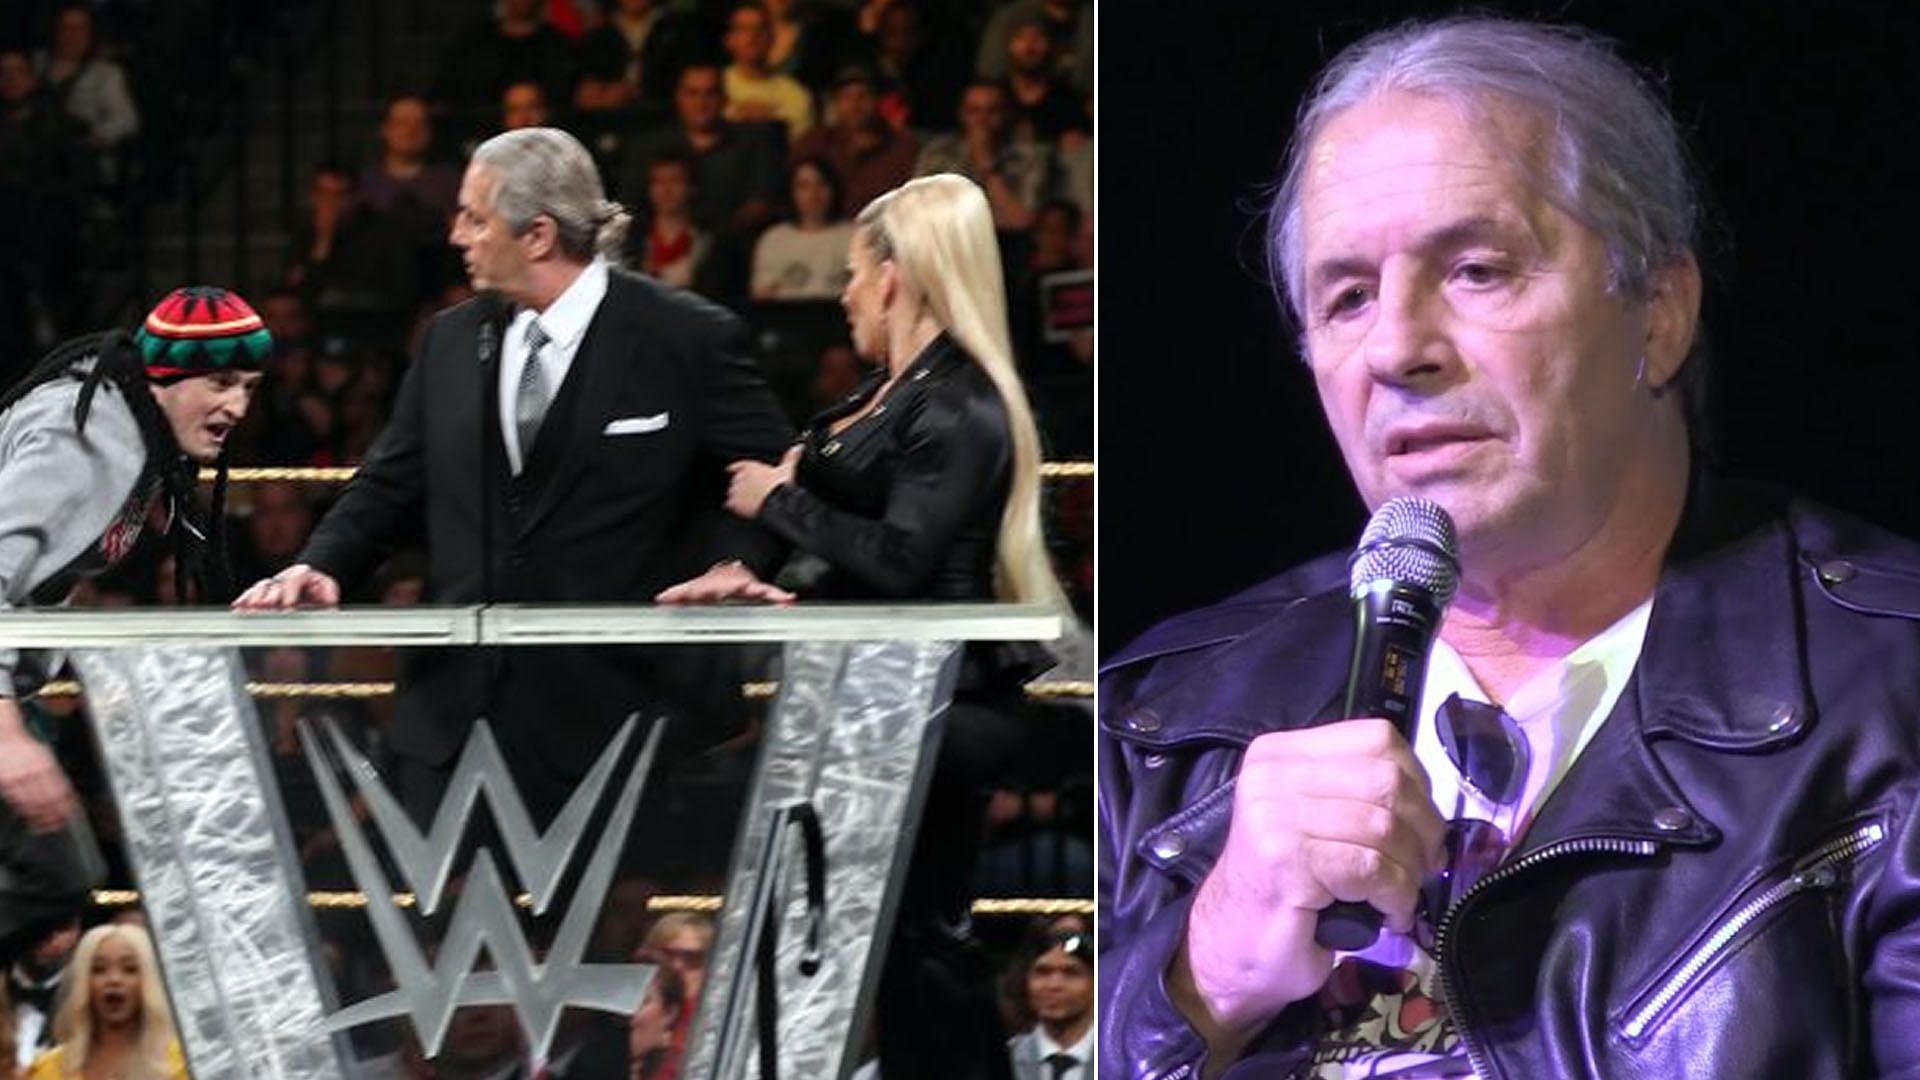 WWE Hall of Famer Bret Hart was attacked by a fan in 2019.